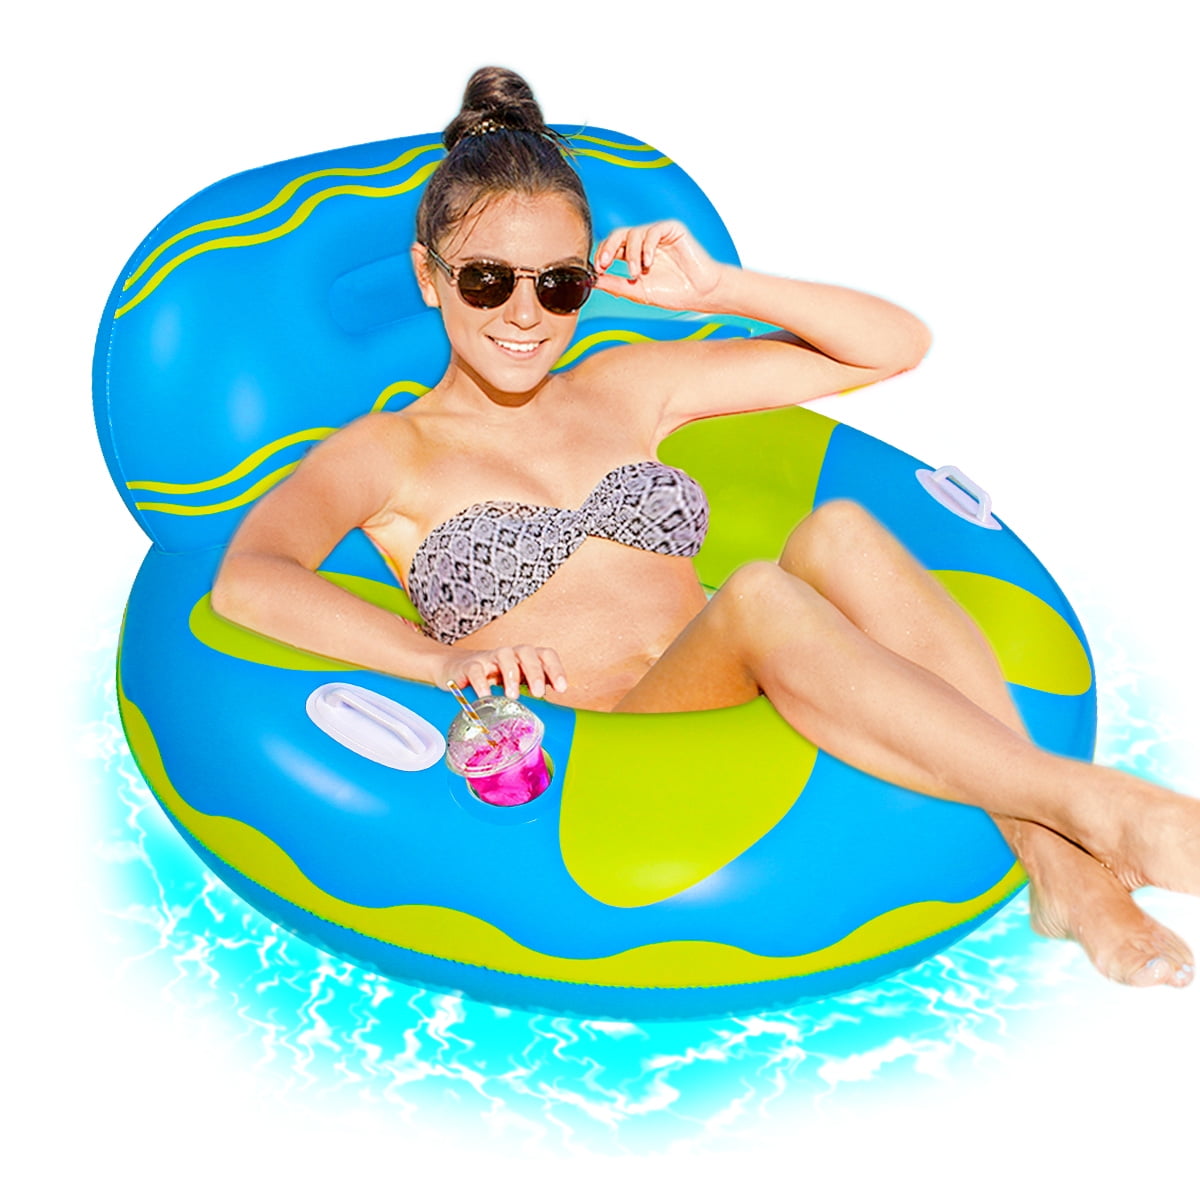 Floating Float Swimming Pool Lounge Bed Inflatable Enjoy Life Hot n' spicy 6ft